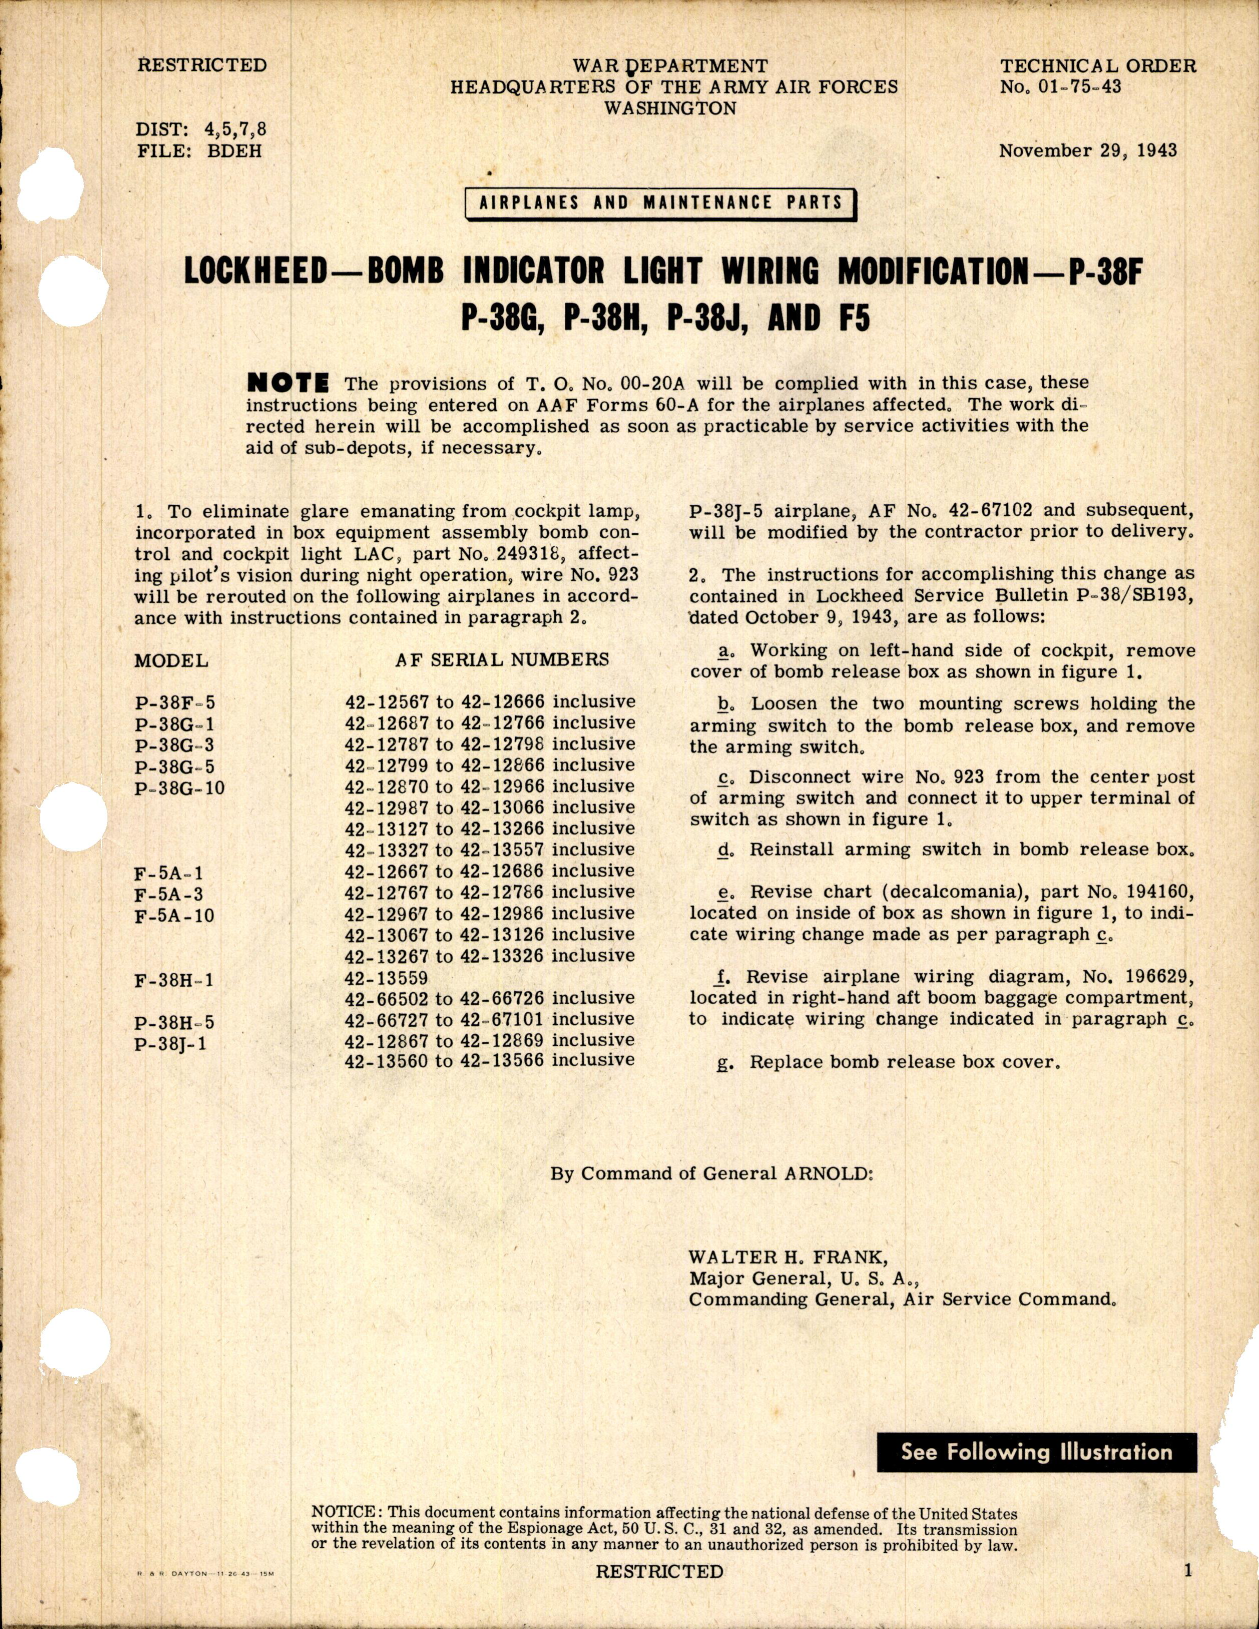 Sample page 1 from AirCorps Library document: Bomb Indicator Light Wiring Modification for P-38F, G, H, J, and F5